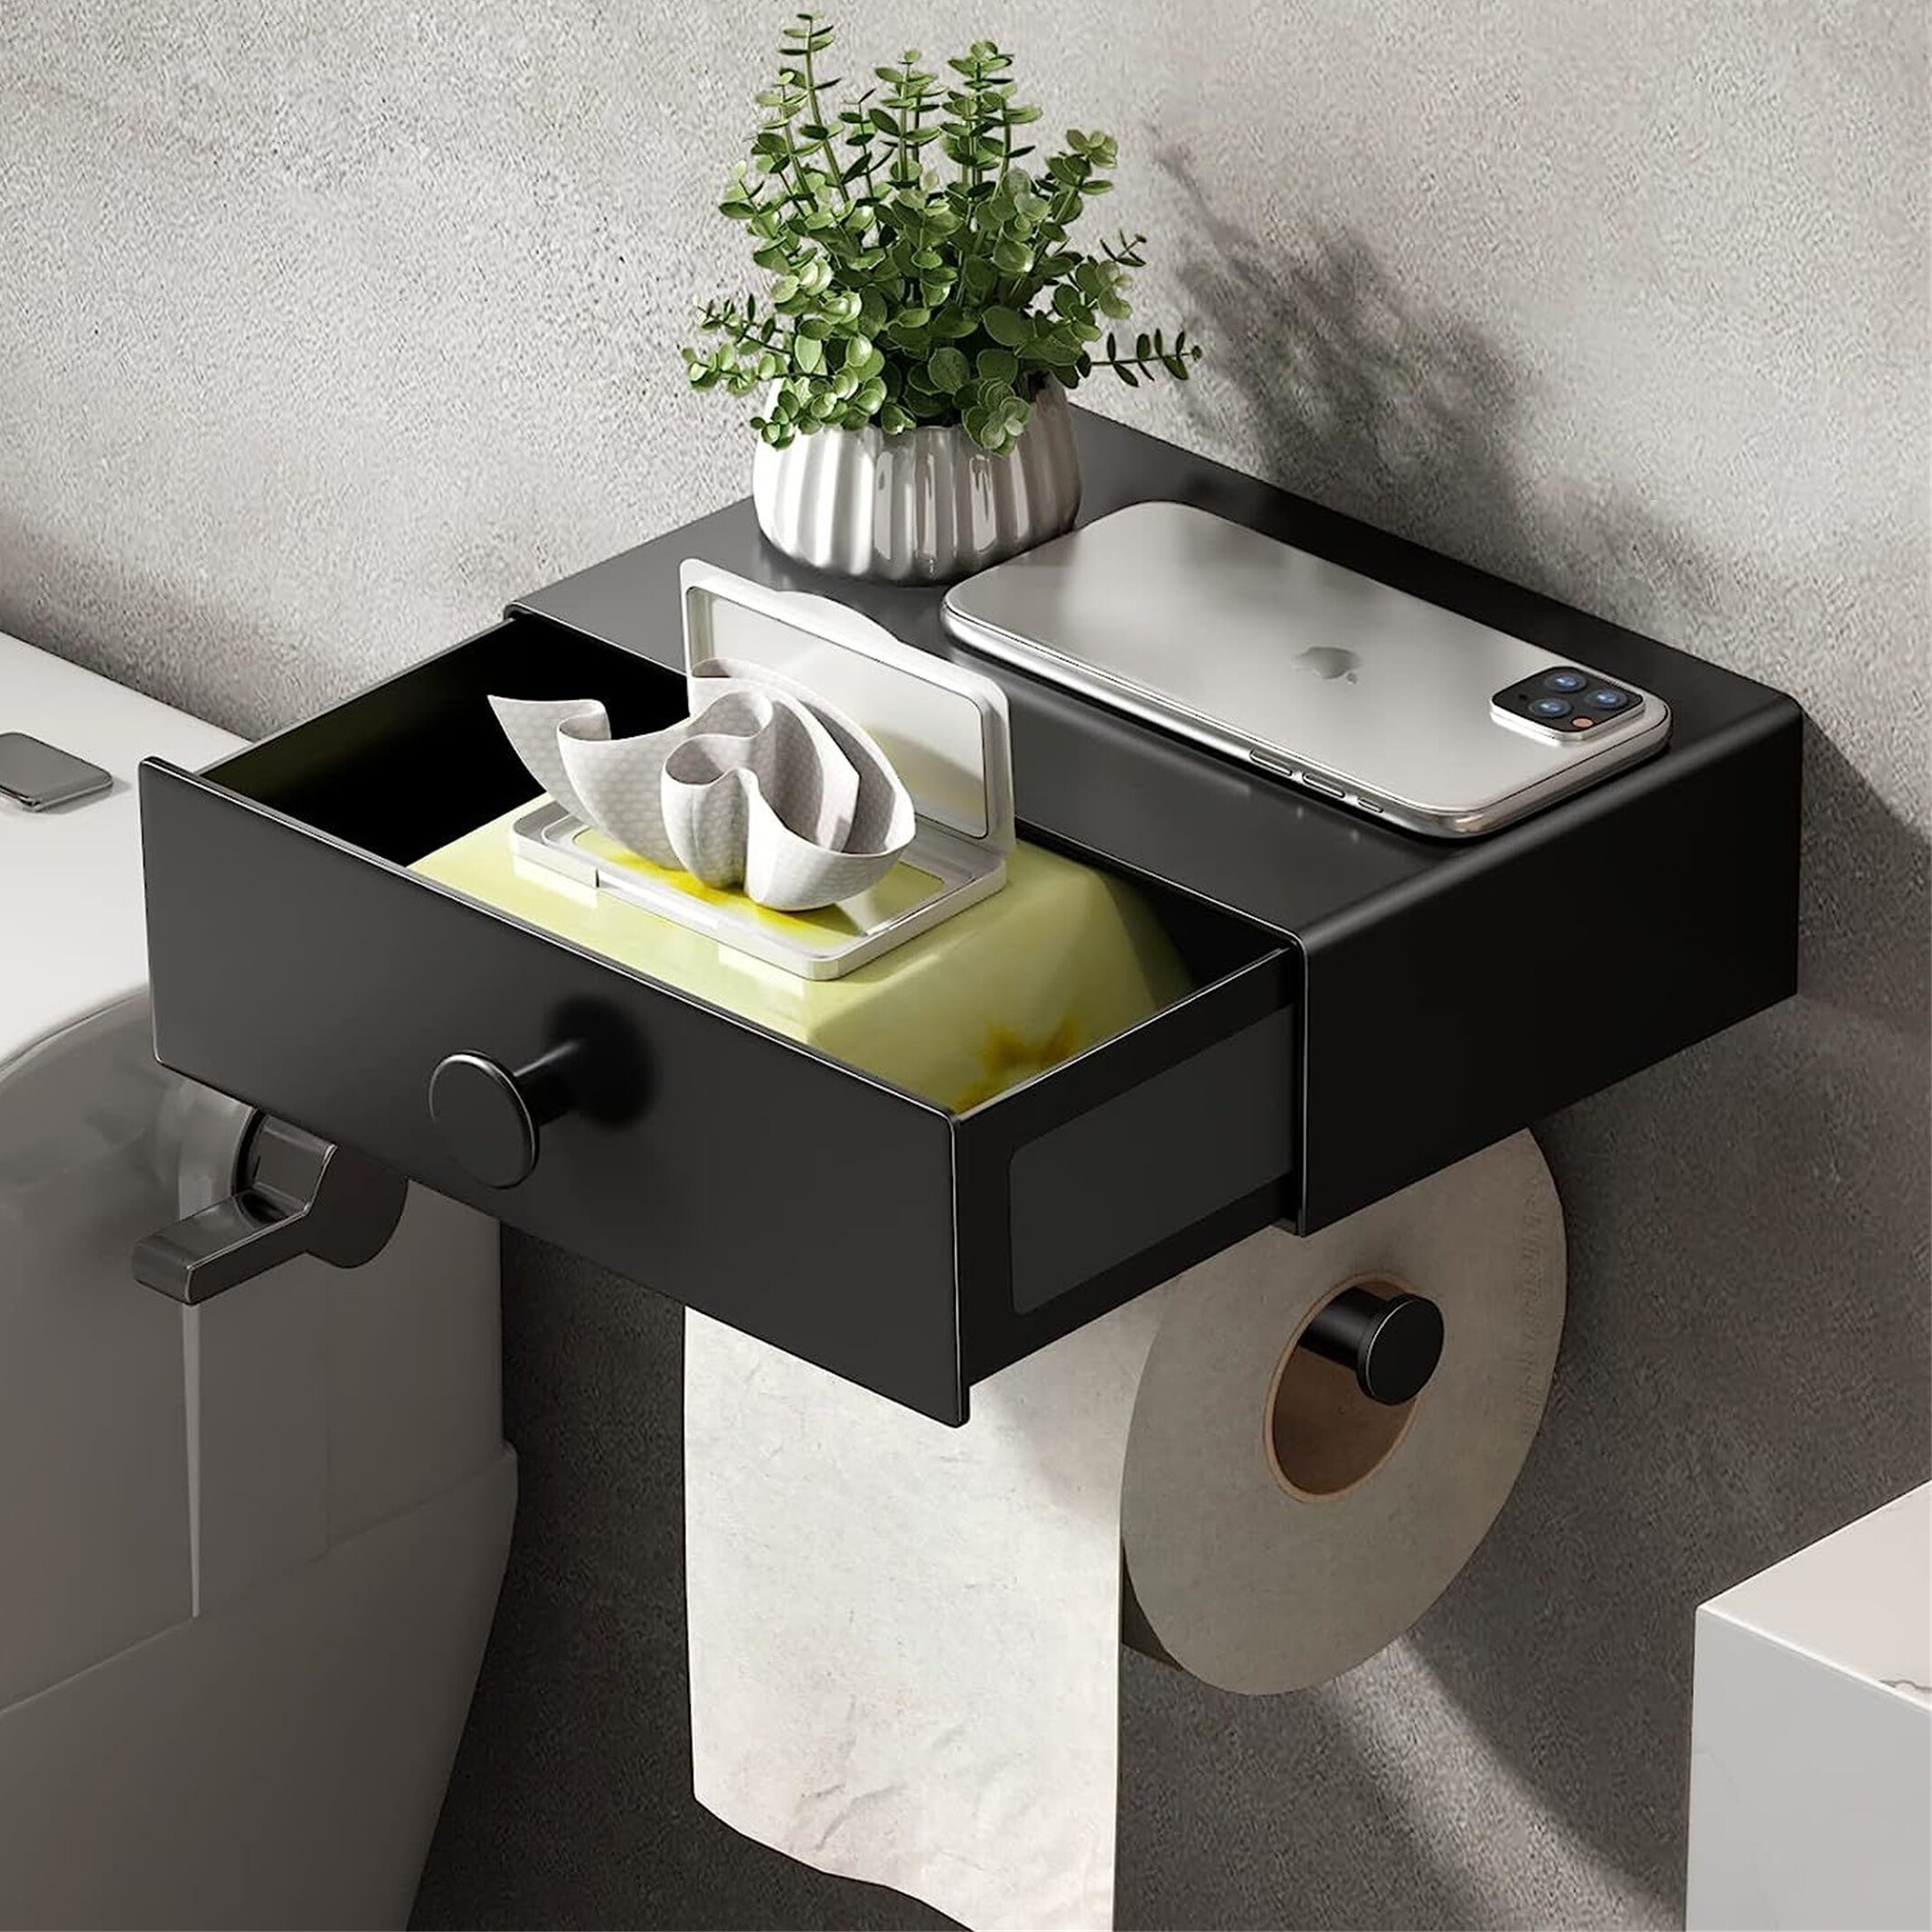 https://ak1.ostkcdn.com/images/products/is/images/direct/7b43aec1f863dea3545c0ba9821bc35fe529edac/Toilet-Paper-Holder-with-Shelf.jpg